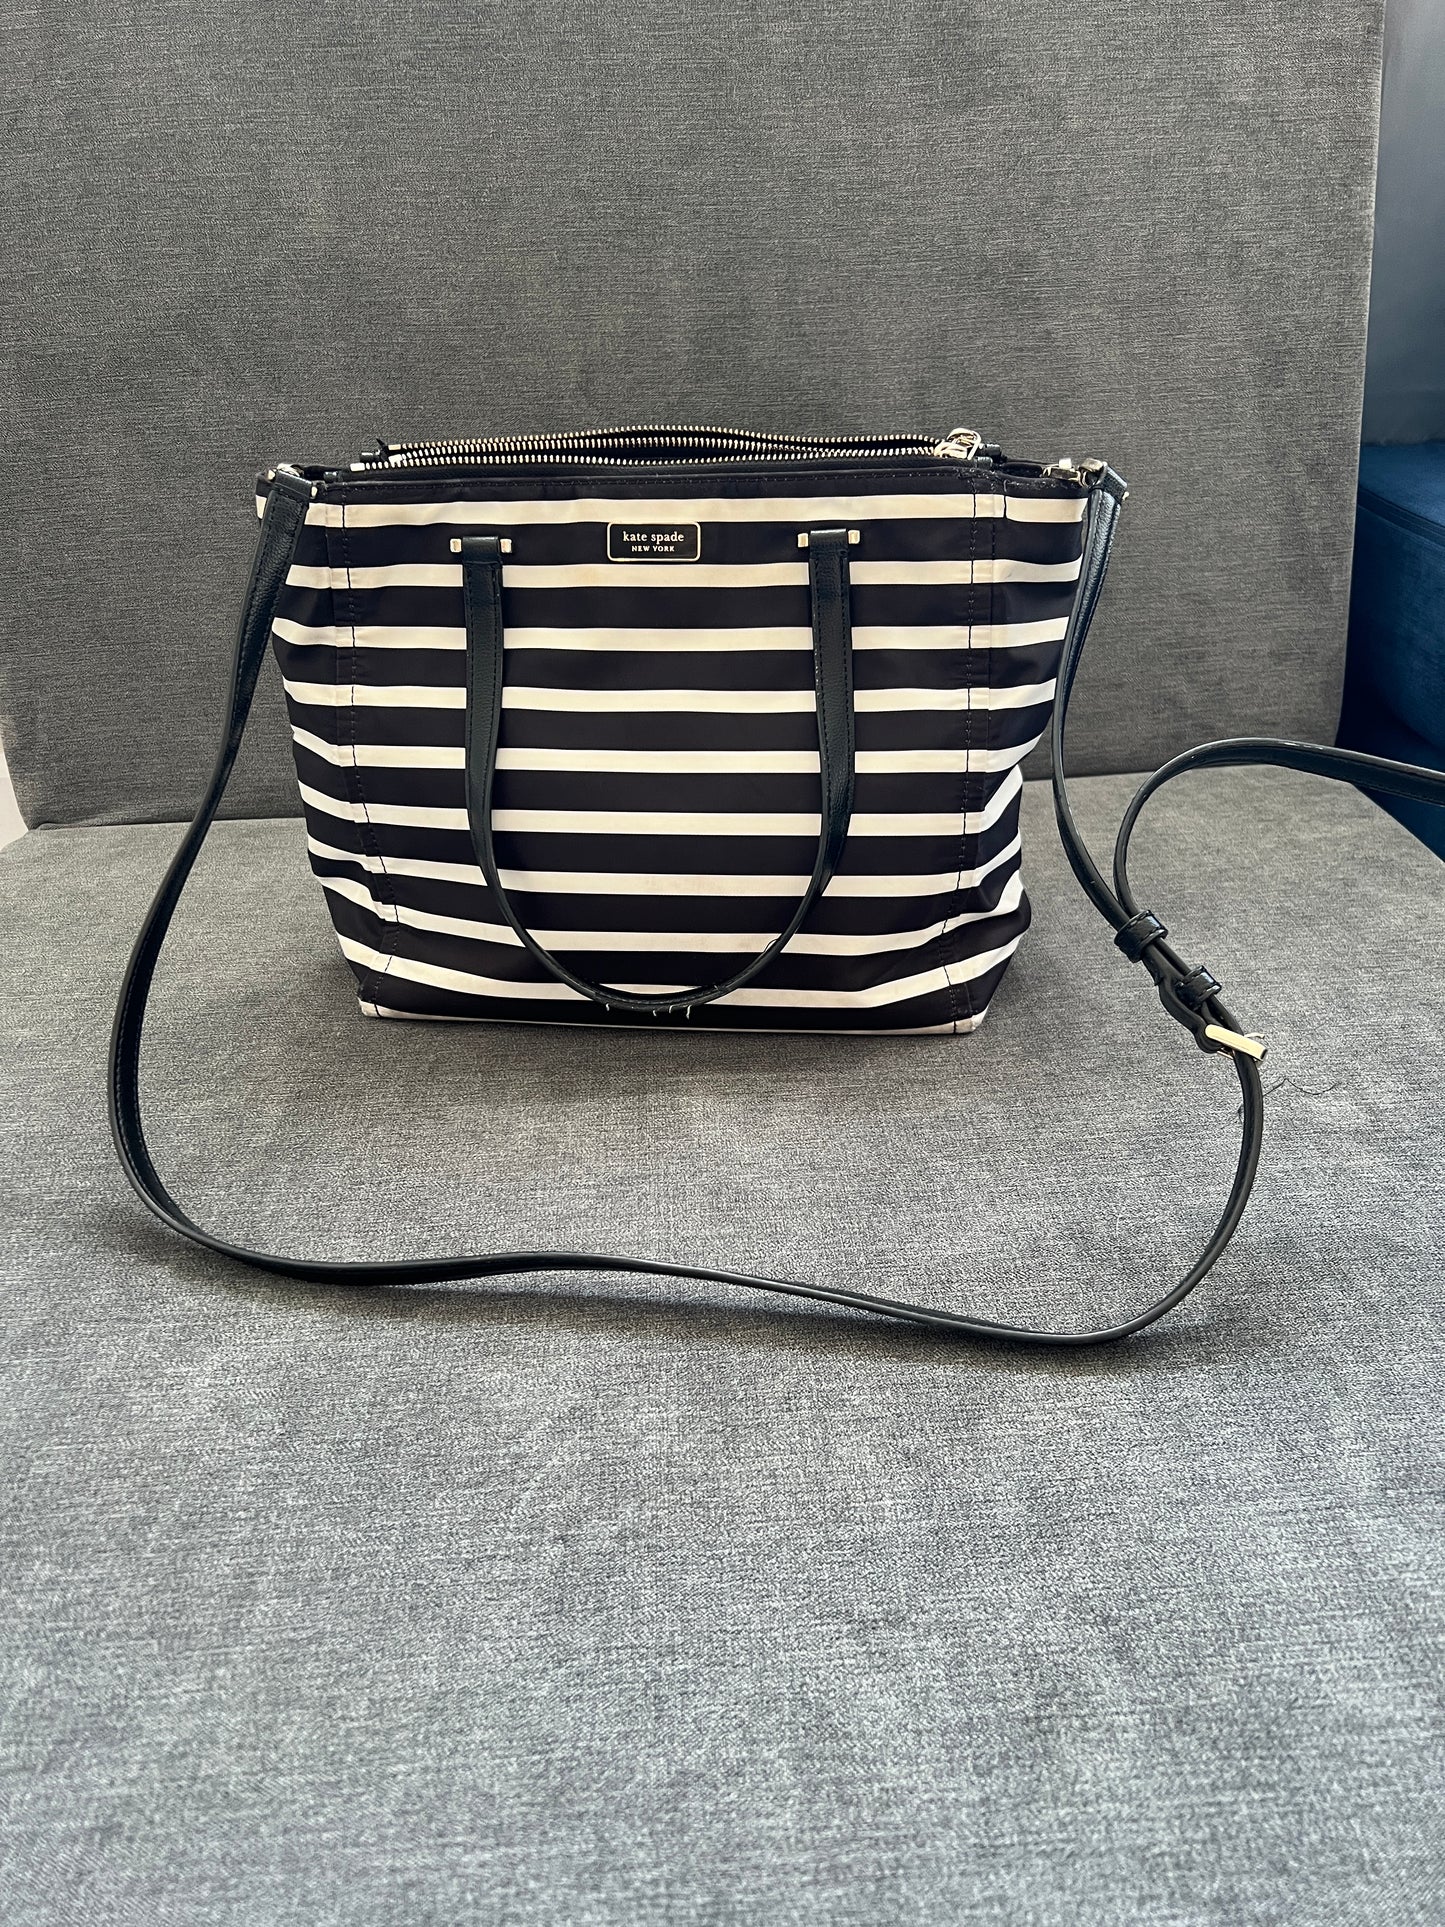 Kate Spade Striped Over the Shoulder Bag with Crossbody Strap- PPU 45044 (Liberty Twp)